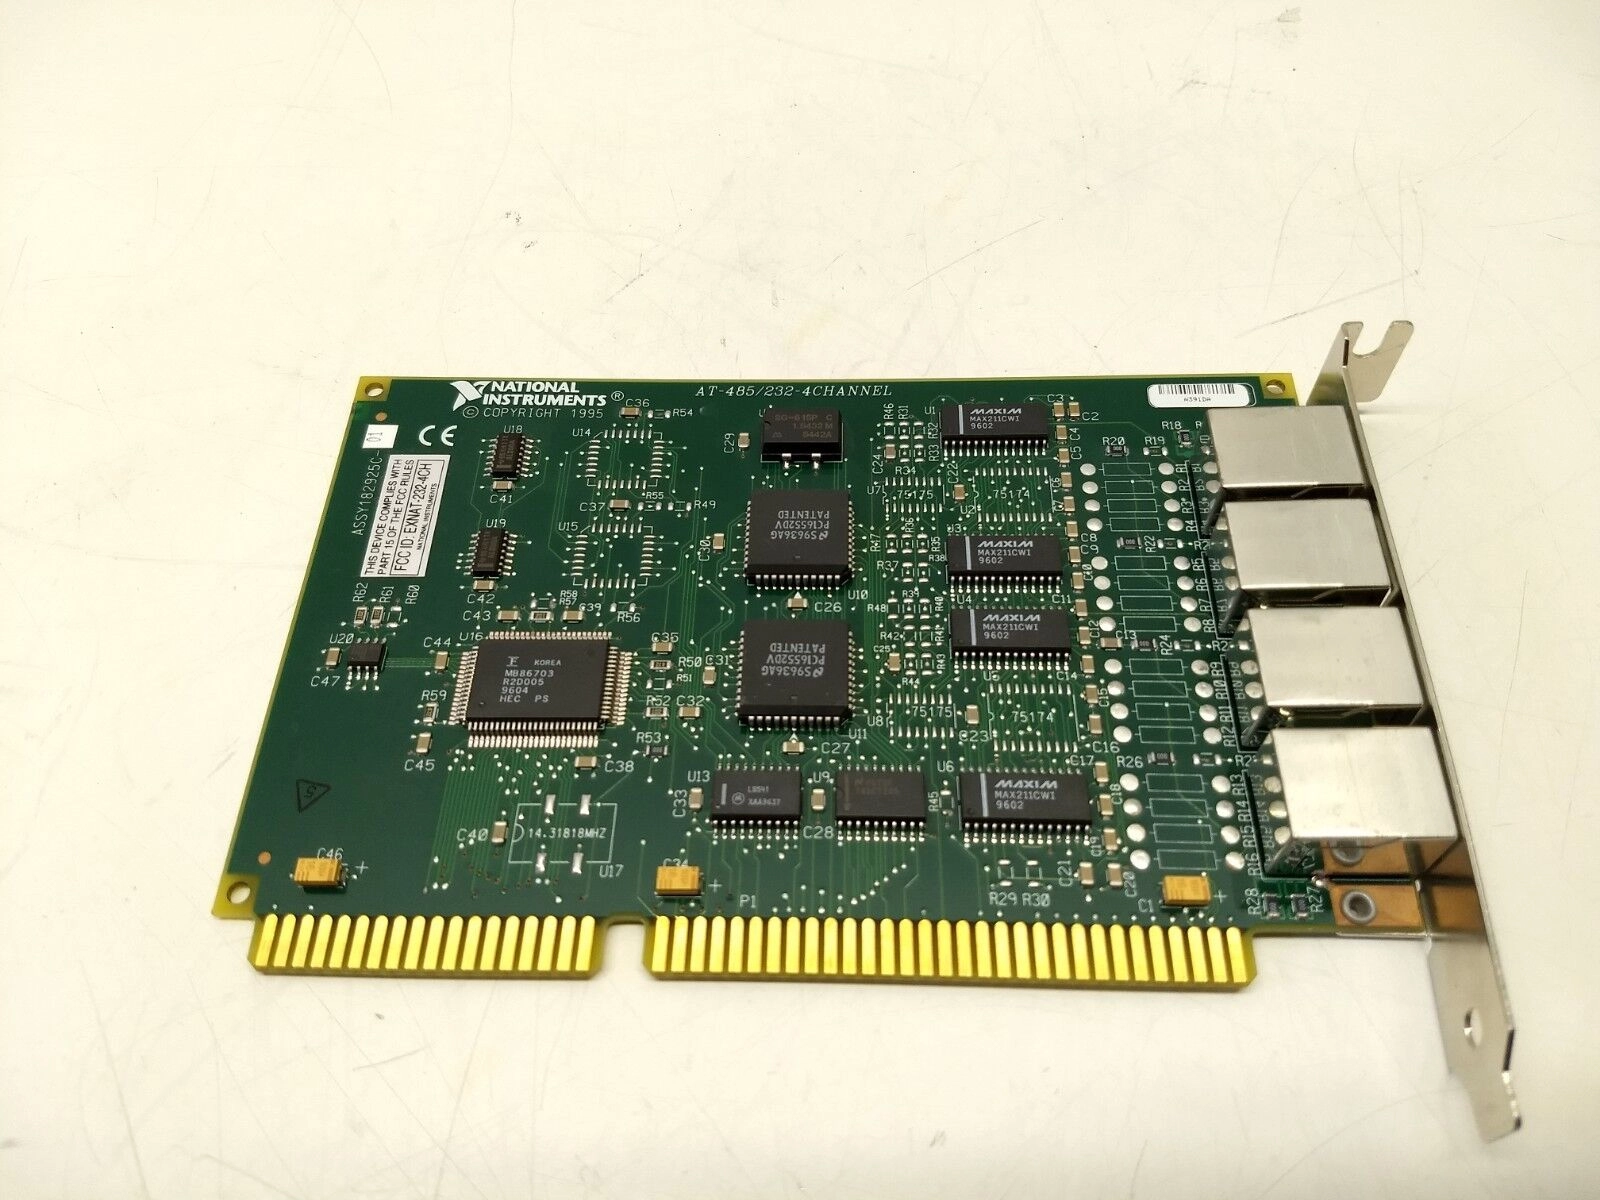 National Instruments AT-485/232-4 Channel Card